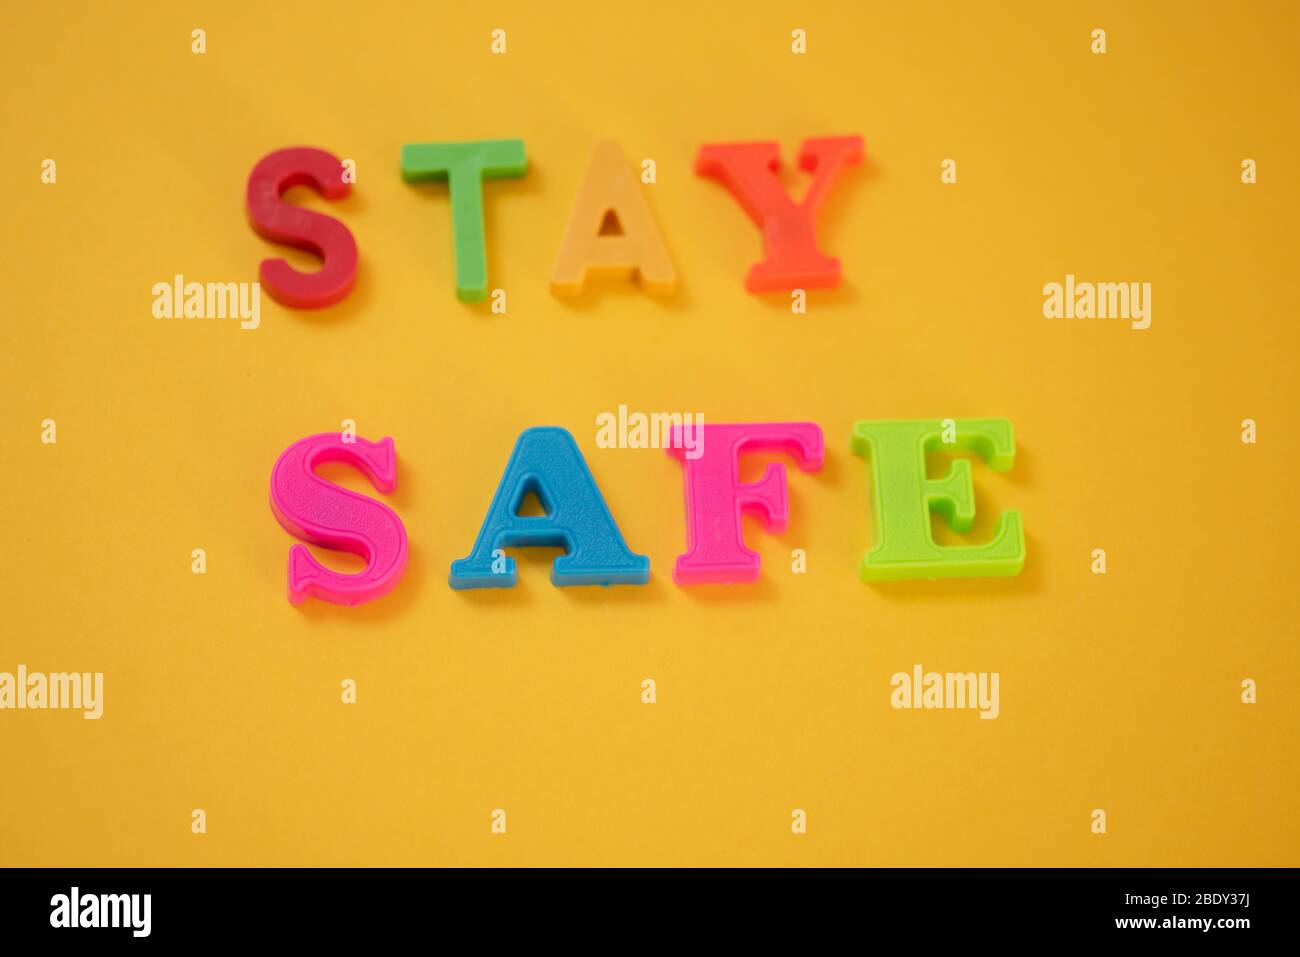 Stay safe isolated against colorful background Stock Photo